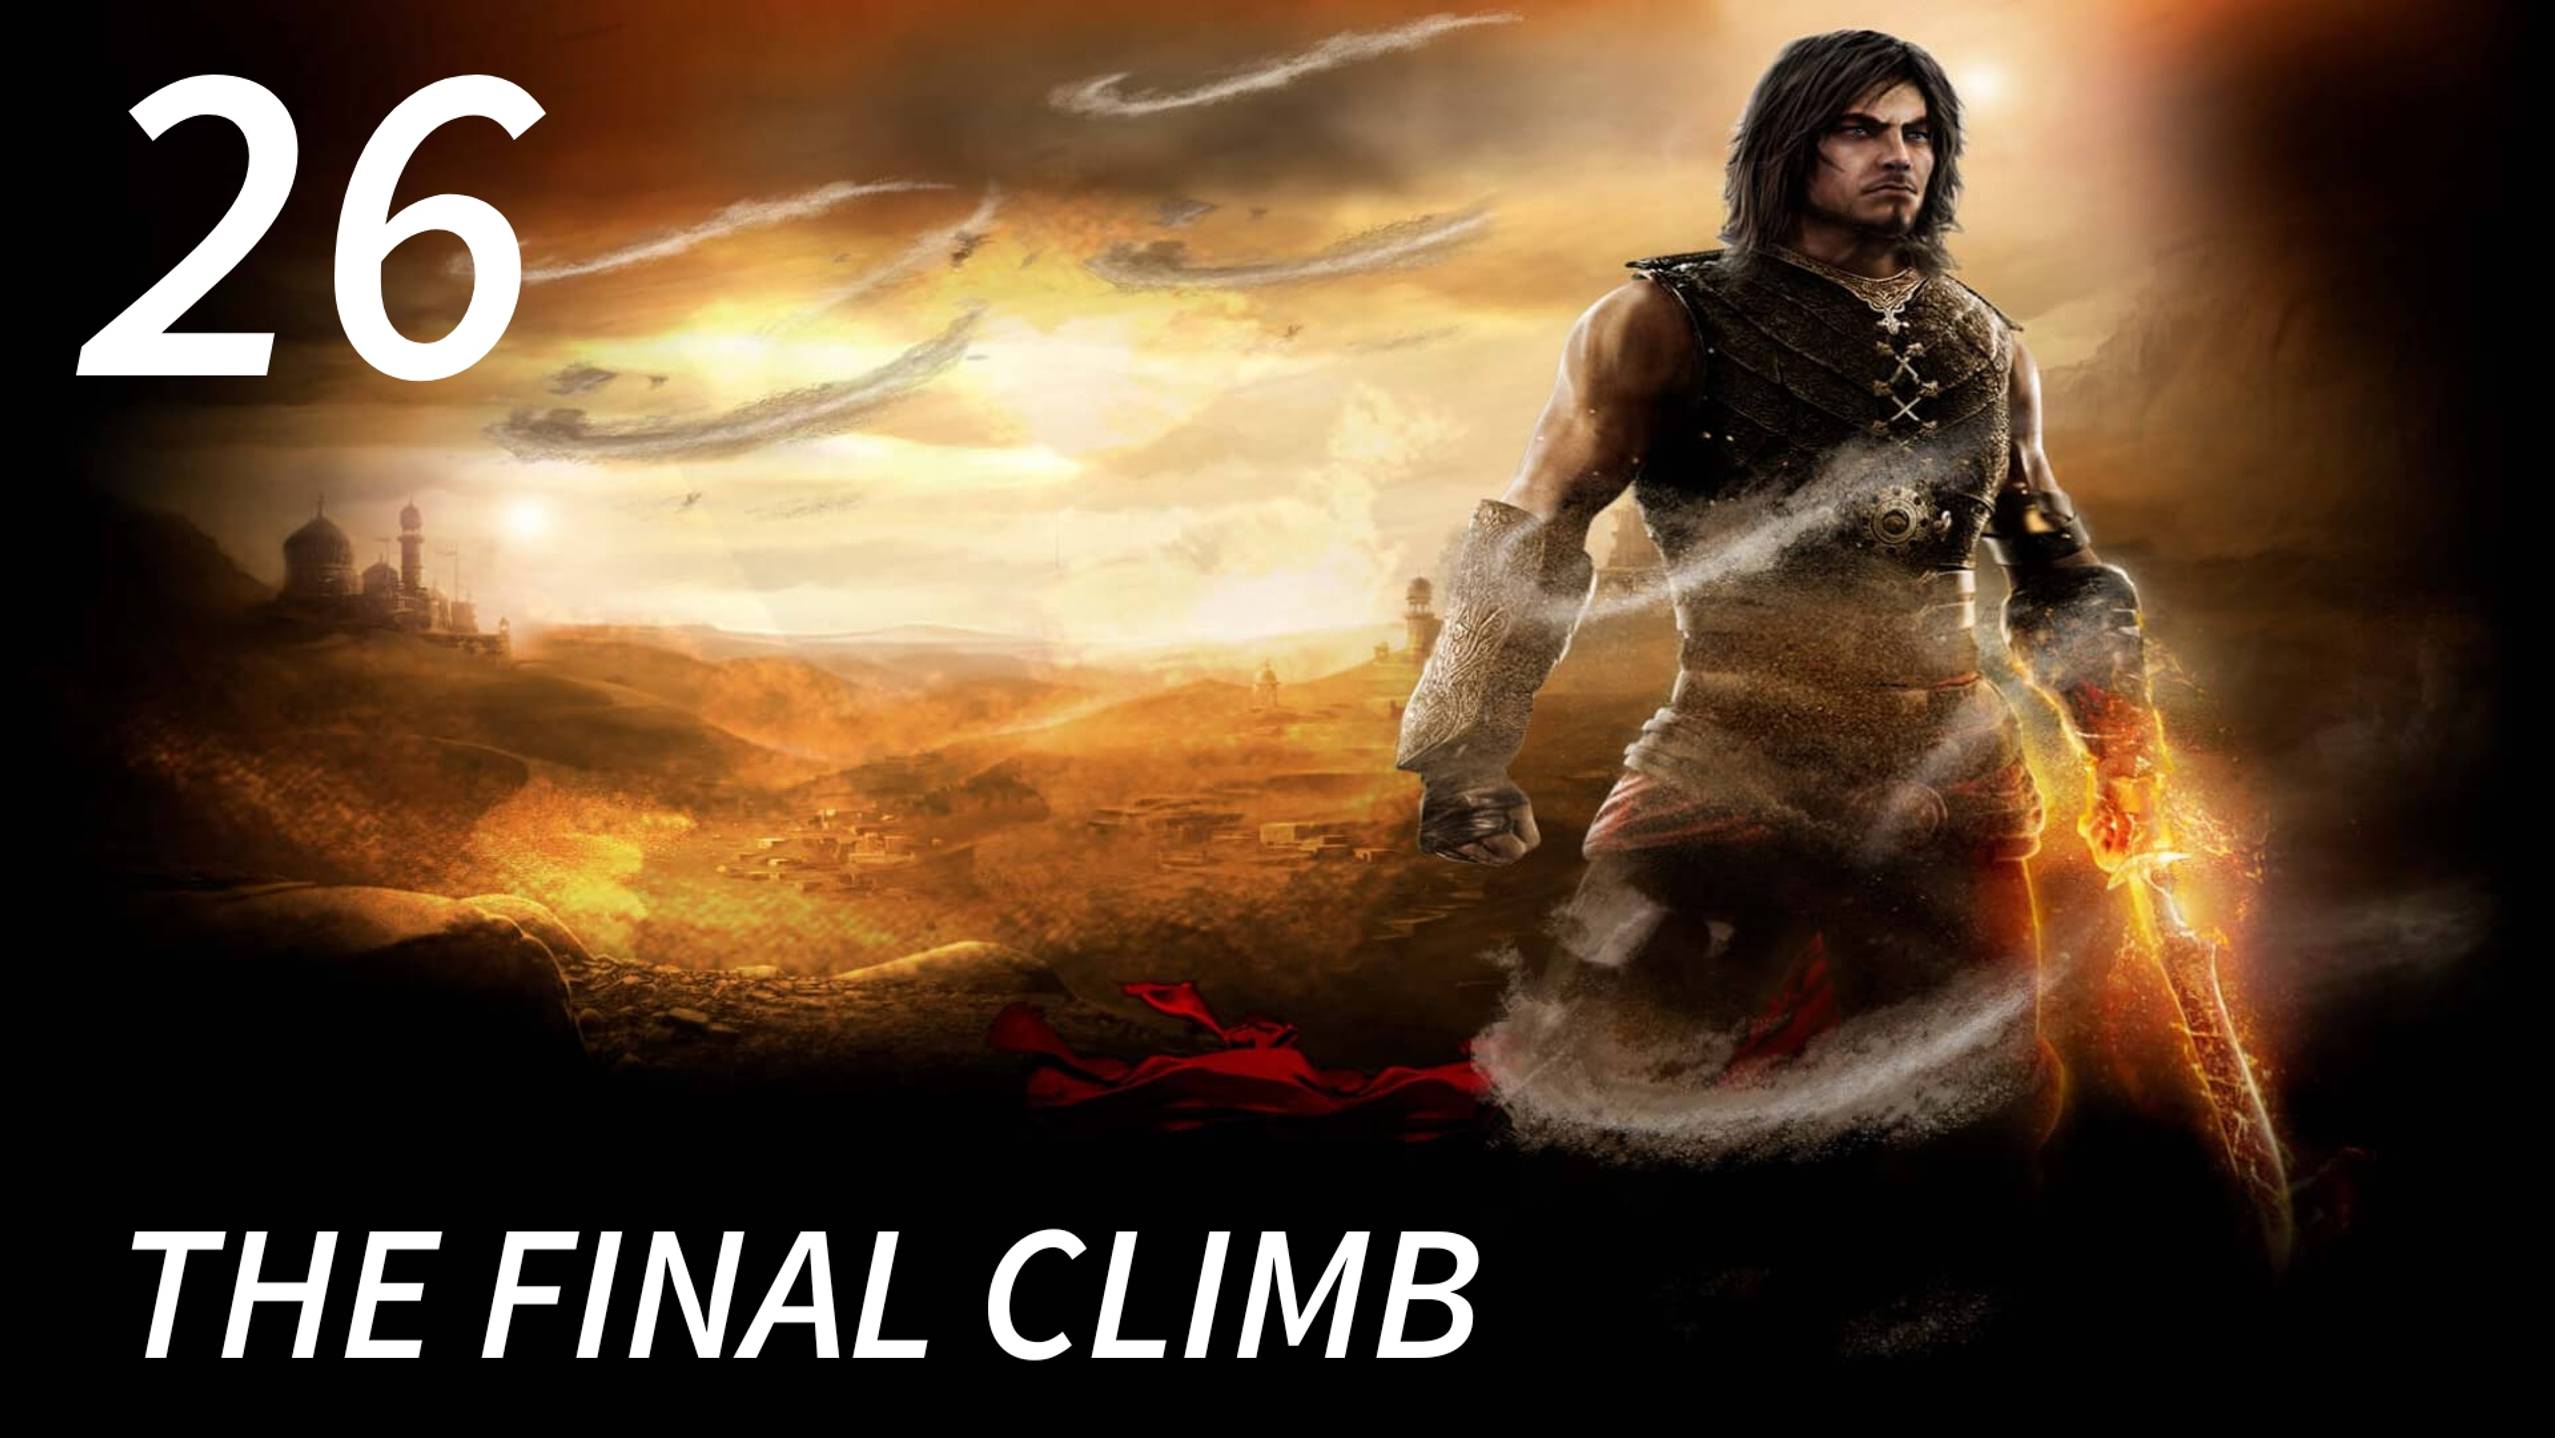 Prince of Persia: The Forgotten Sands / The Final Climb